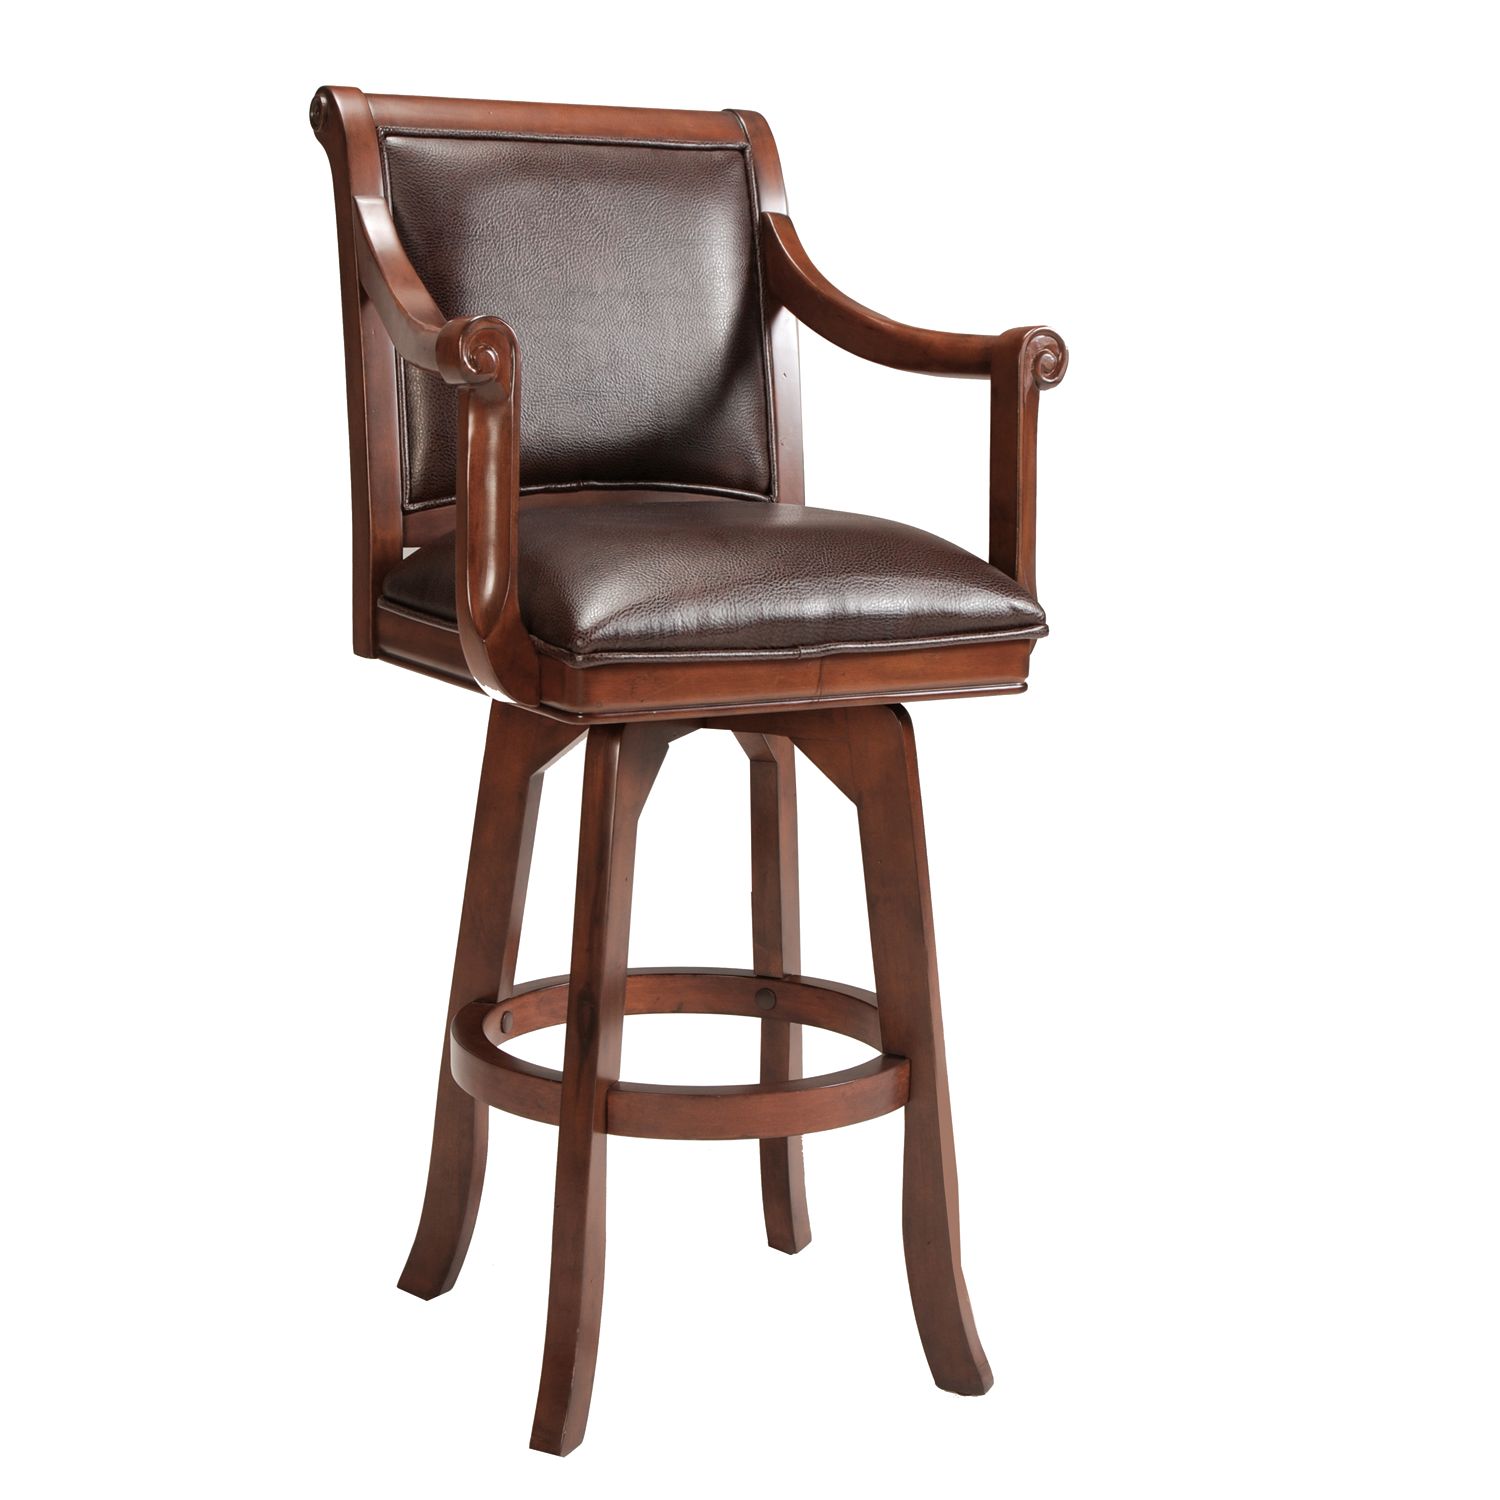 Image for Hillsdale Furniture Palm Springs Swivel Bar Stool at Kohl's.